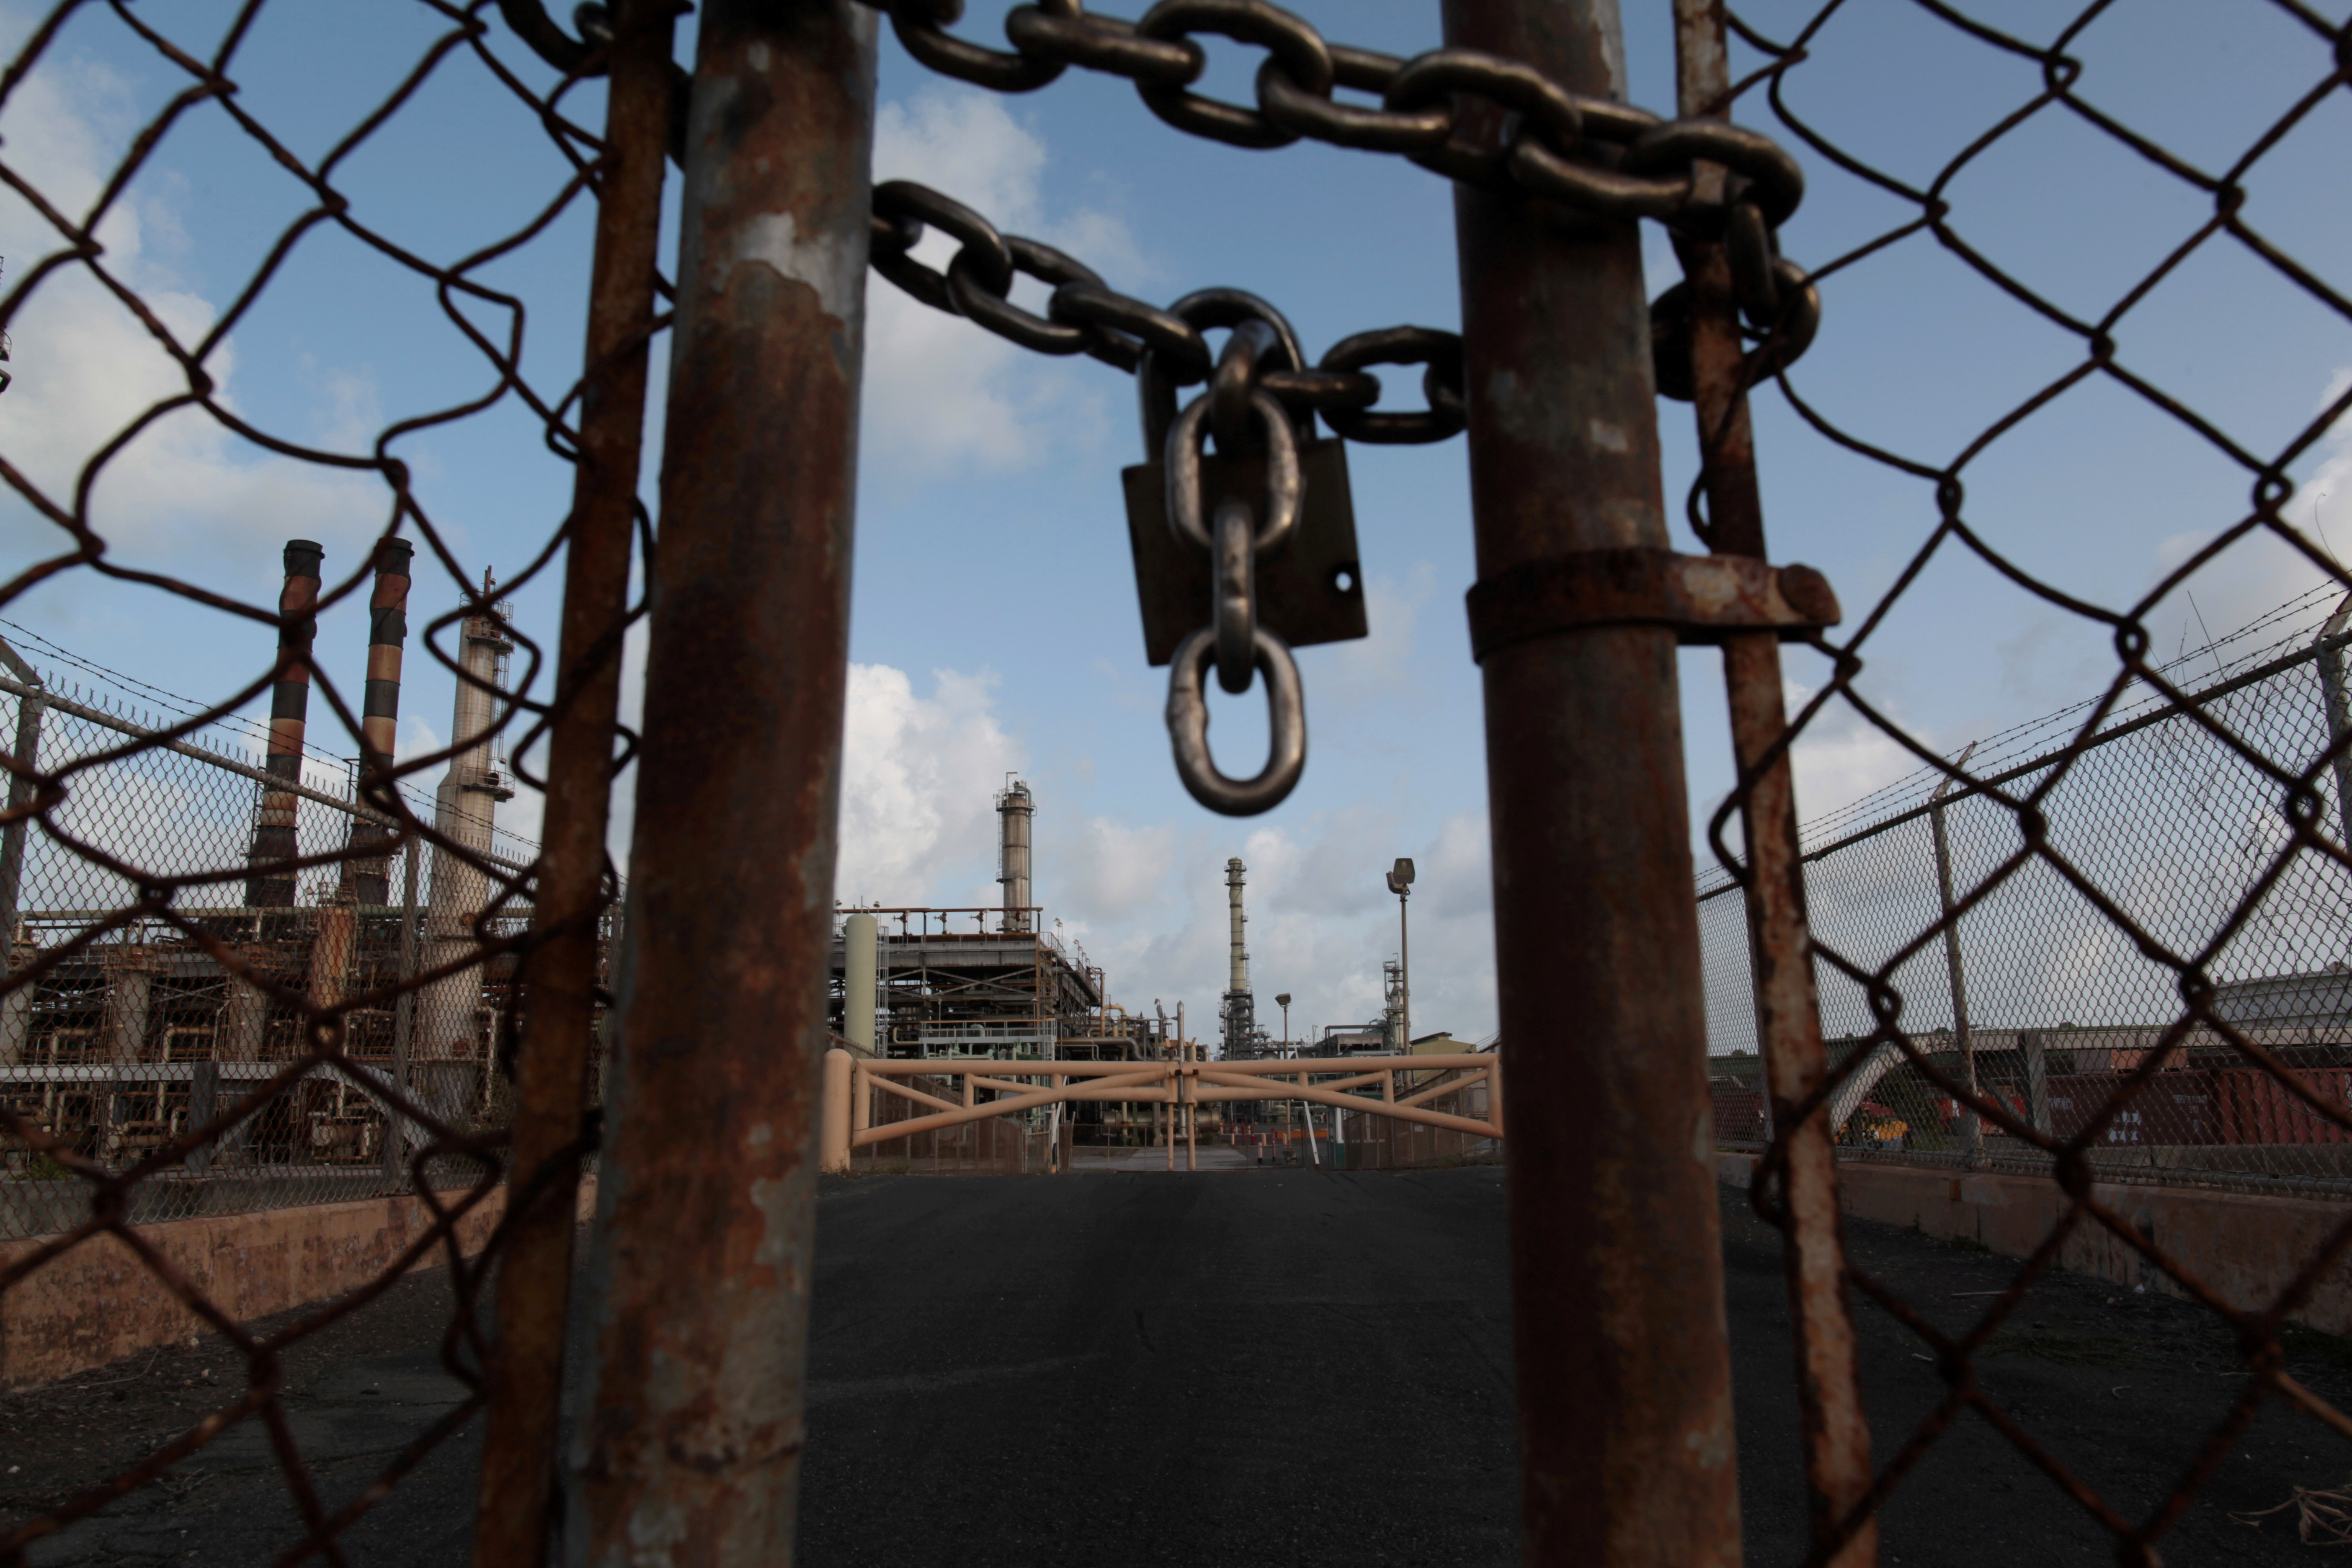 The installations of the St Croix refinery are seen behind a locked gate in St Croix